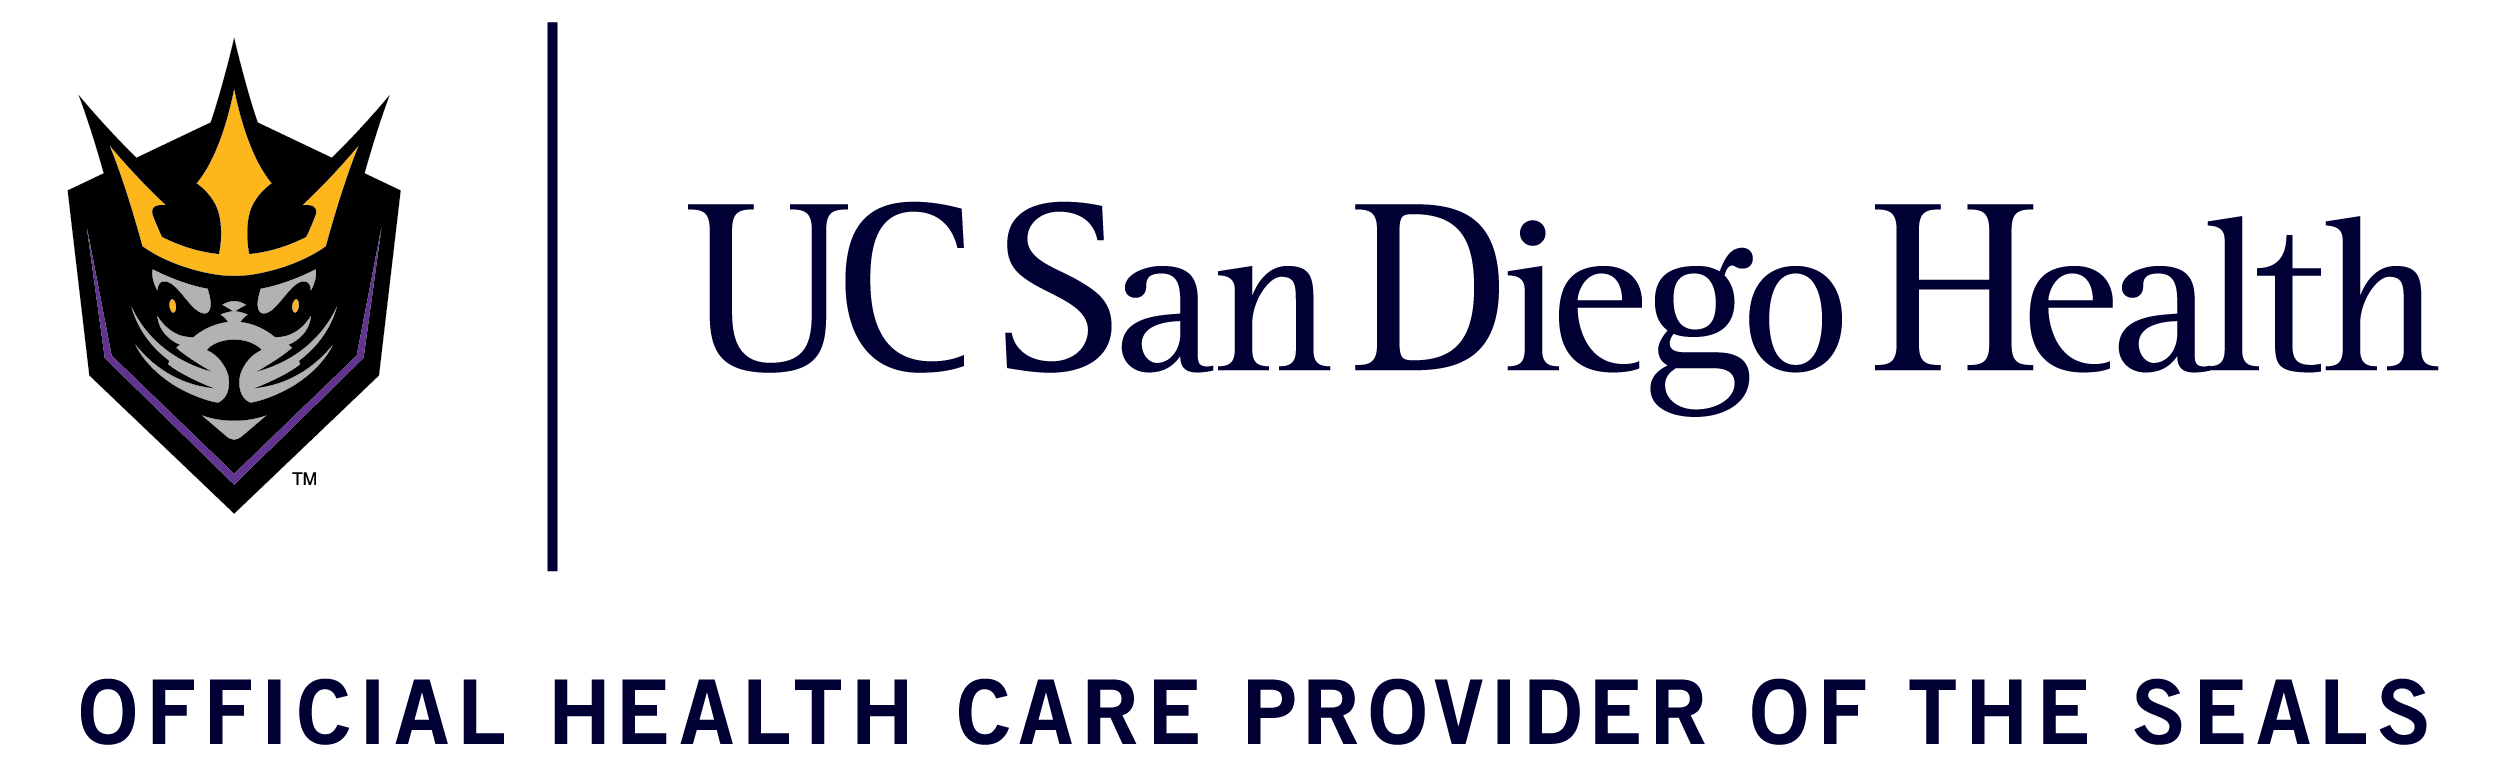 UC San Diego Health Official Health Care Provider of the Seals logo 